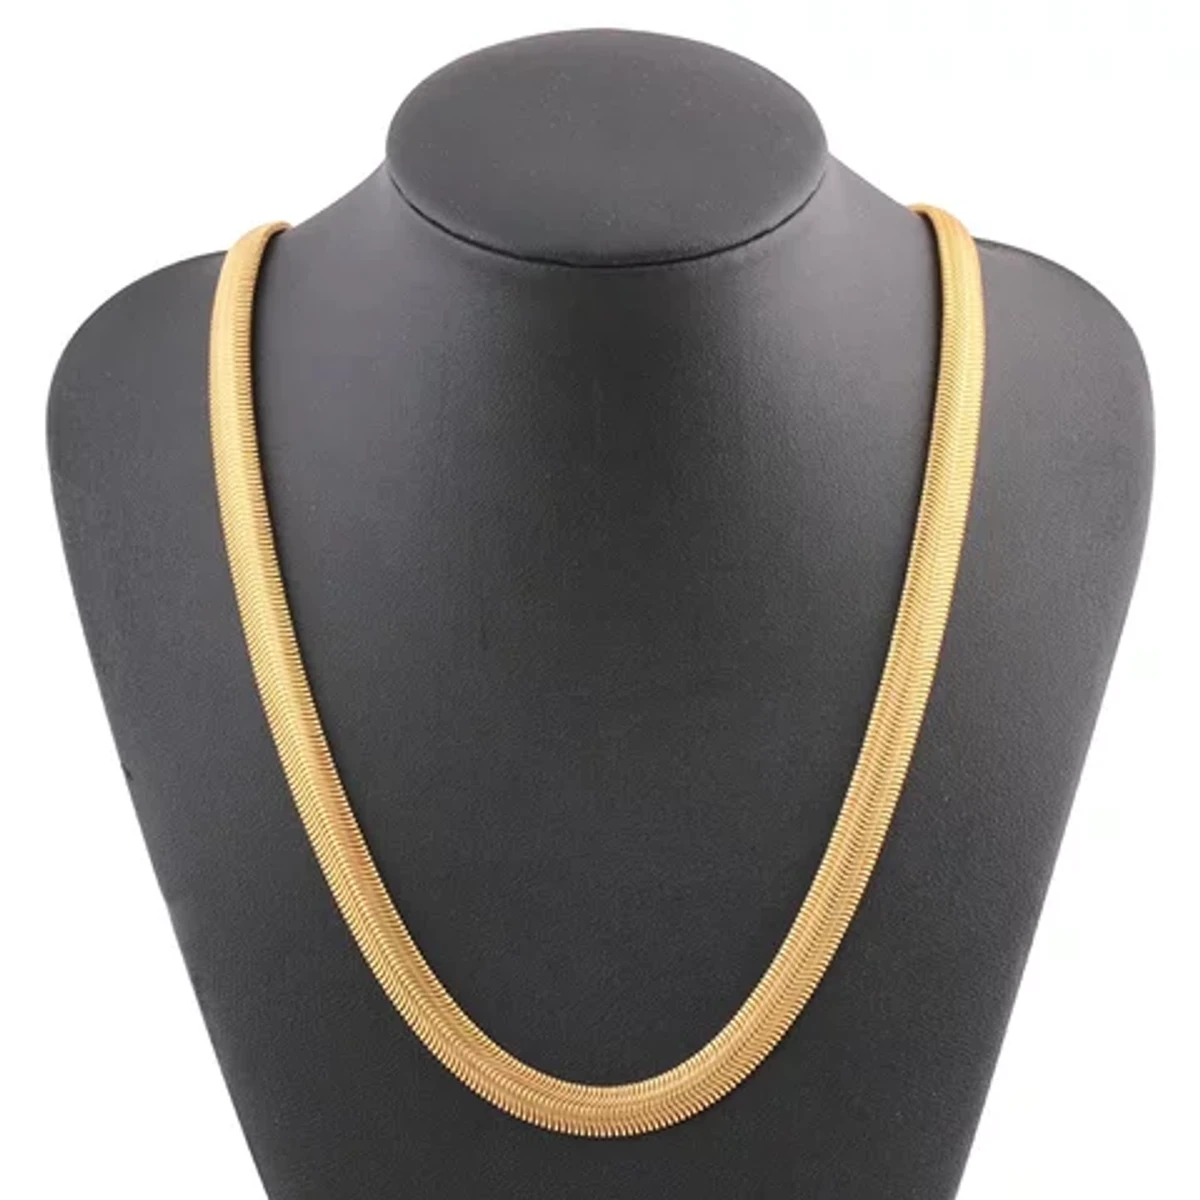 Fashionable Rounded Snake Chain Necklace-FashionAble Snake Chain For Men